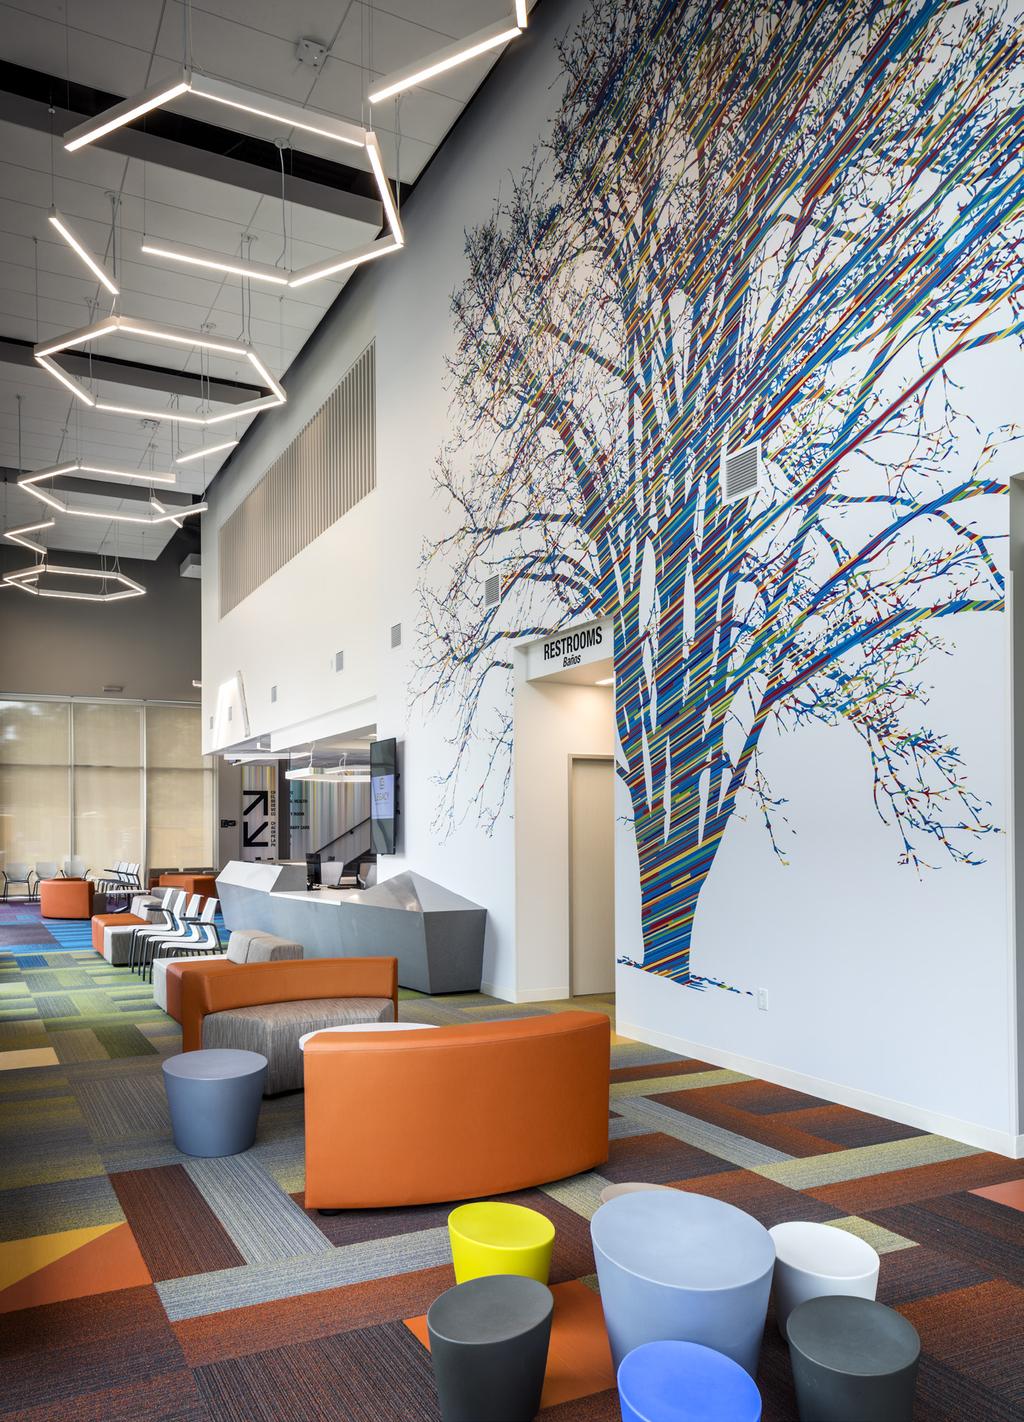 With a ten-year old lease approaching its end date,, a nonfor-profit Federally Qualified Health Center located in Southeast Texas, decided it was time to design and construct a new facility.